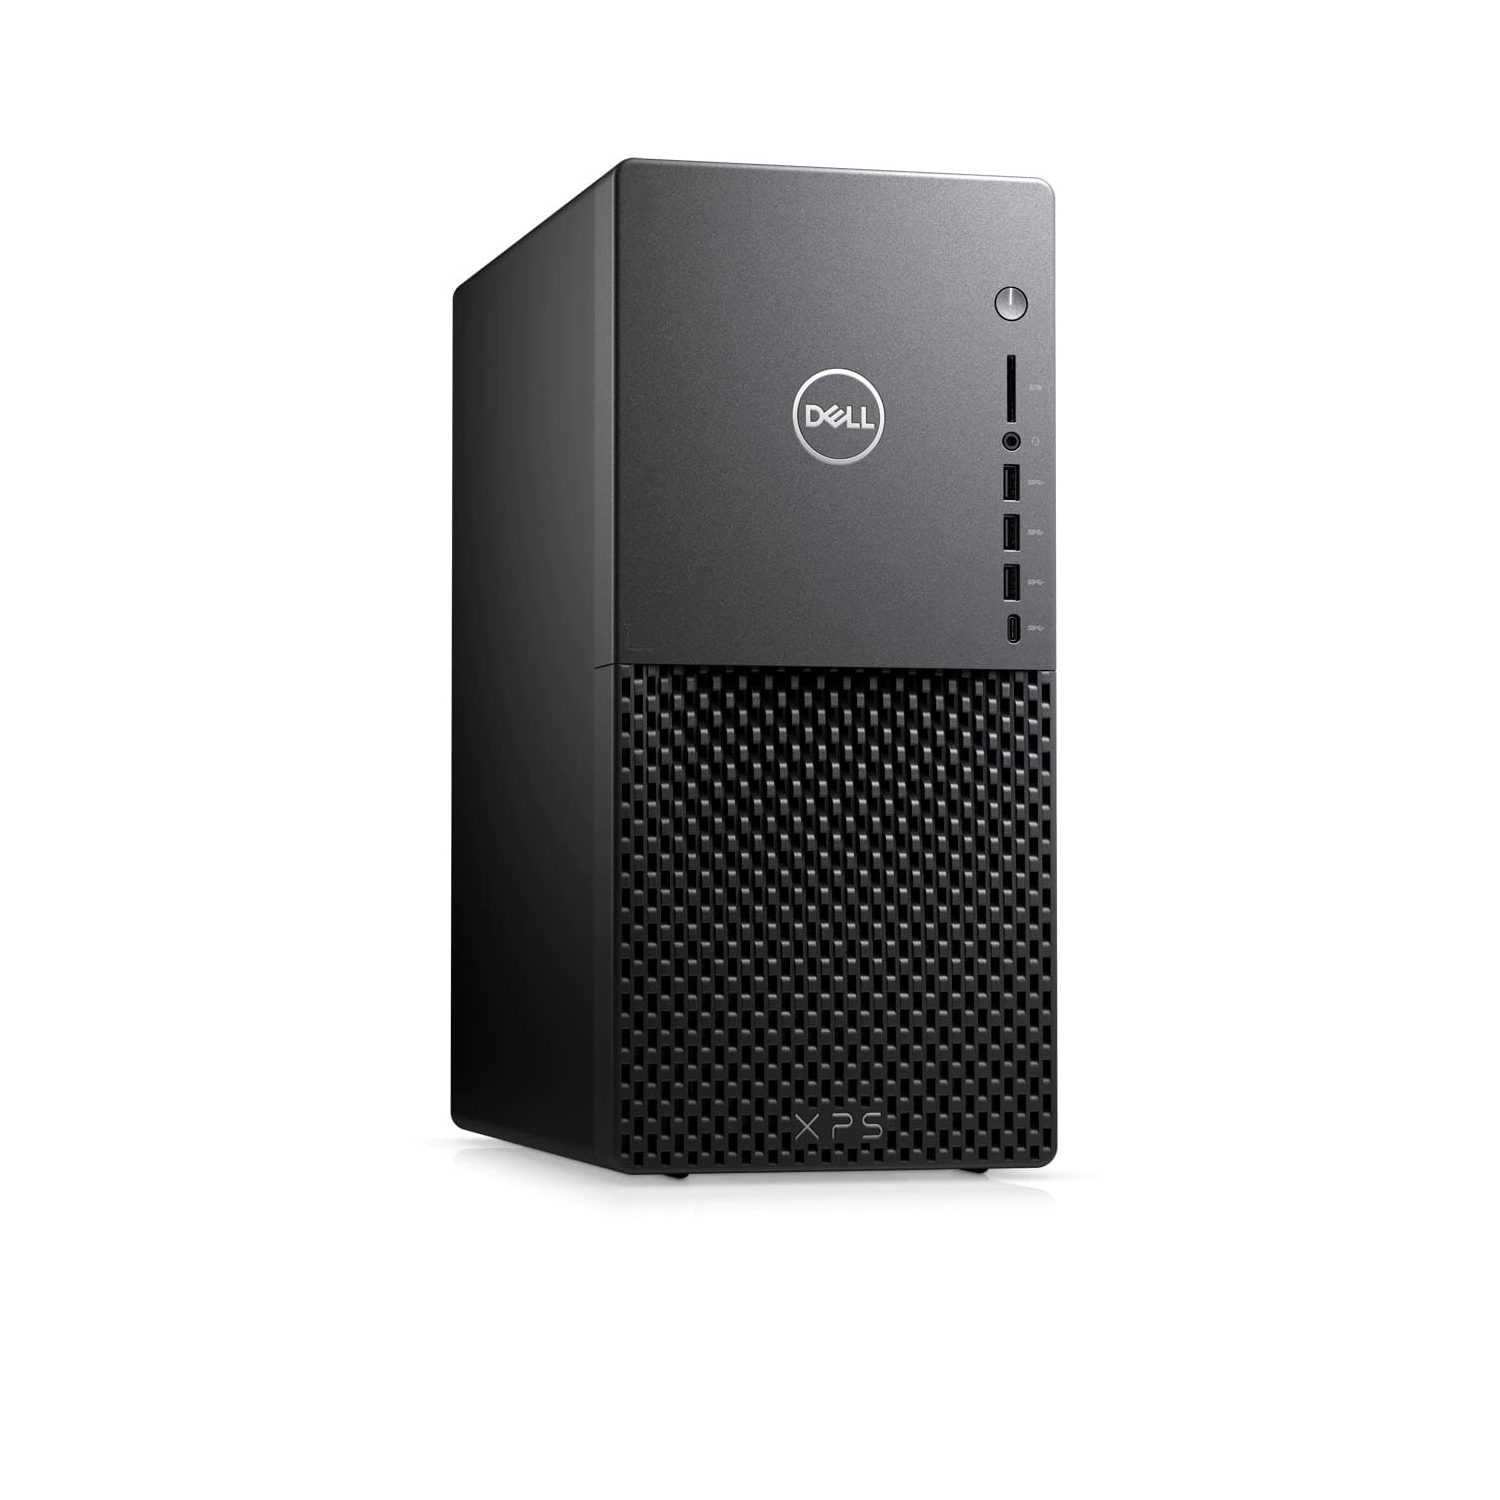 Refurbished (Excellent) - Dell XPS 8940 Desktop (2020) | Core i7 - 512GB SSD - 32GB RAM - GTX 1660 | 8 Cores @ 4.8 GHz - 10th Gen CPU Certified Refurbished